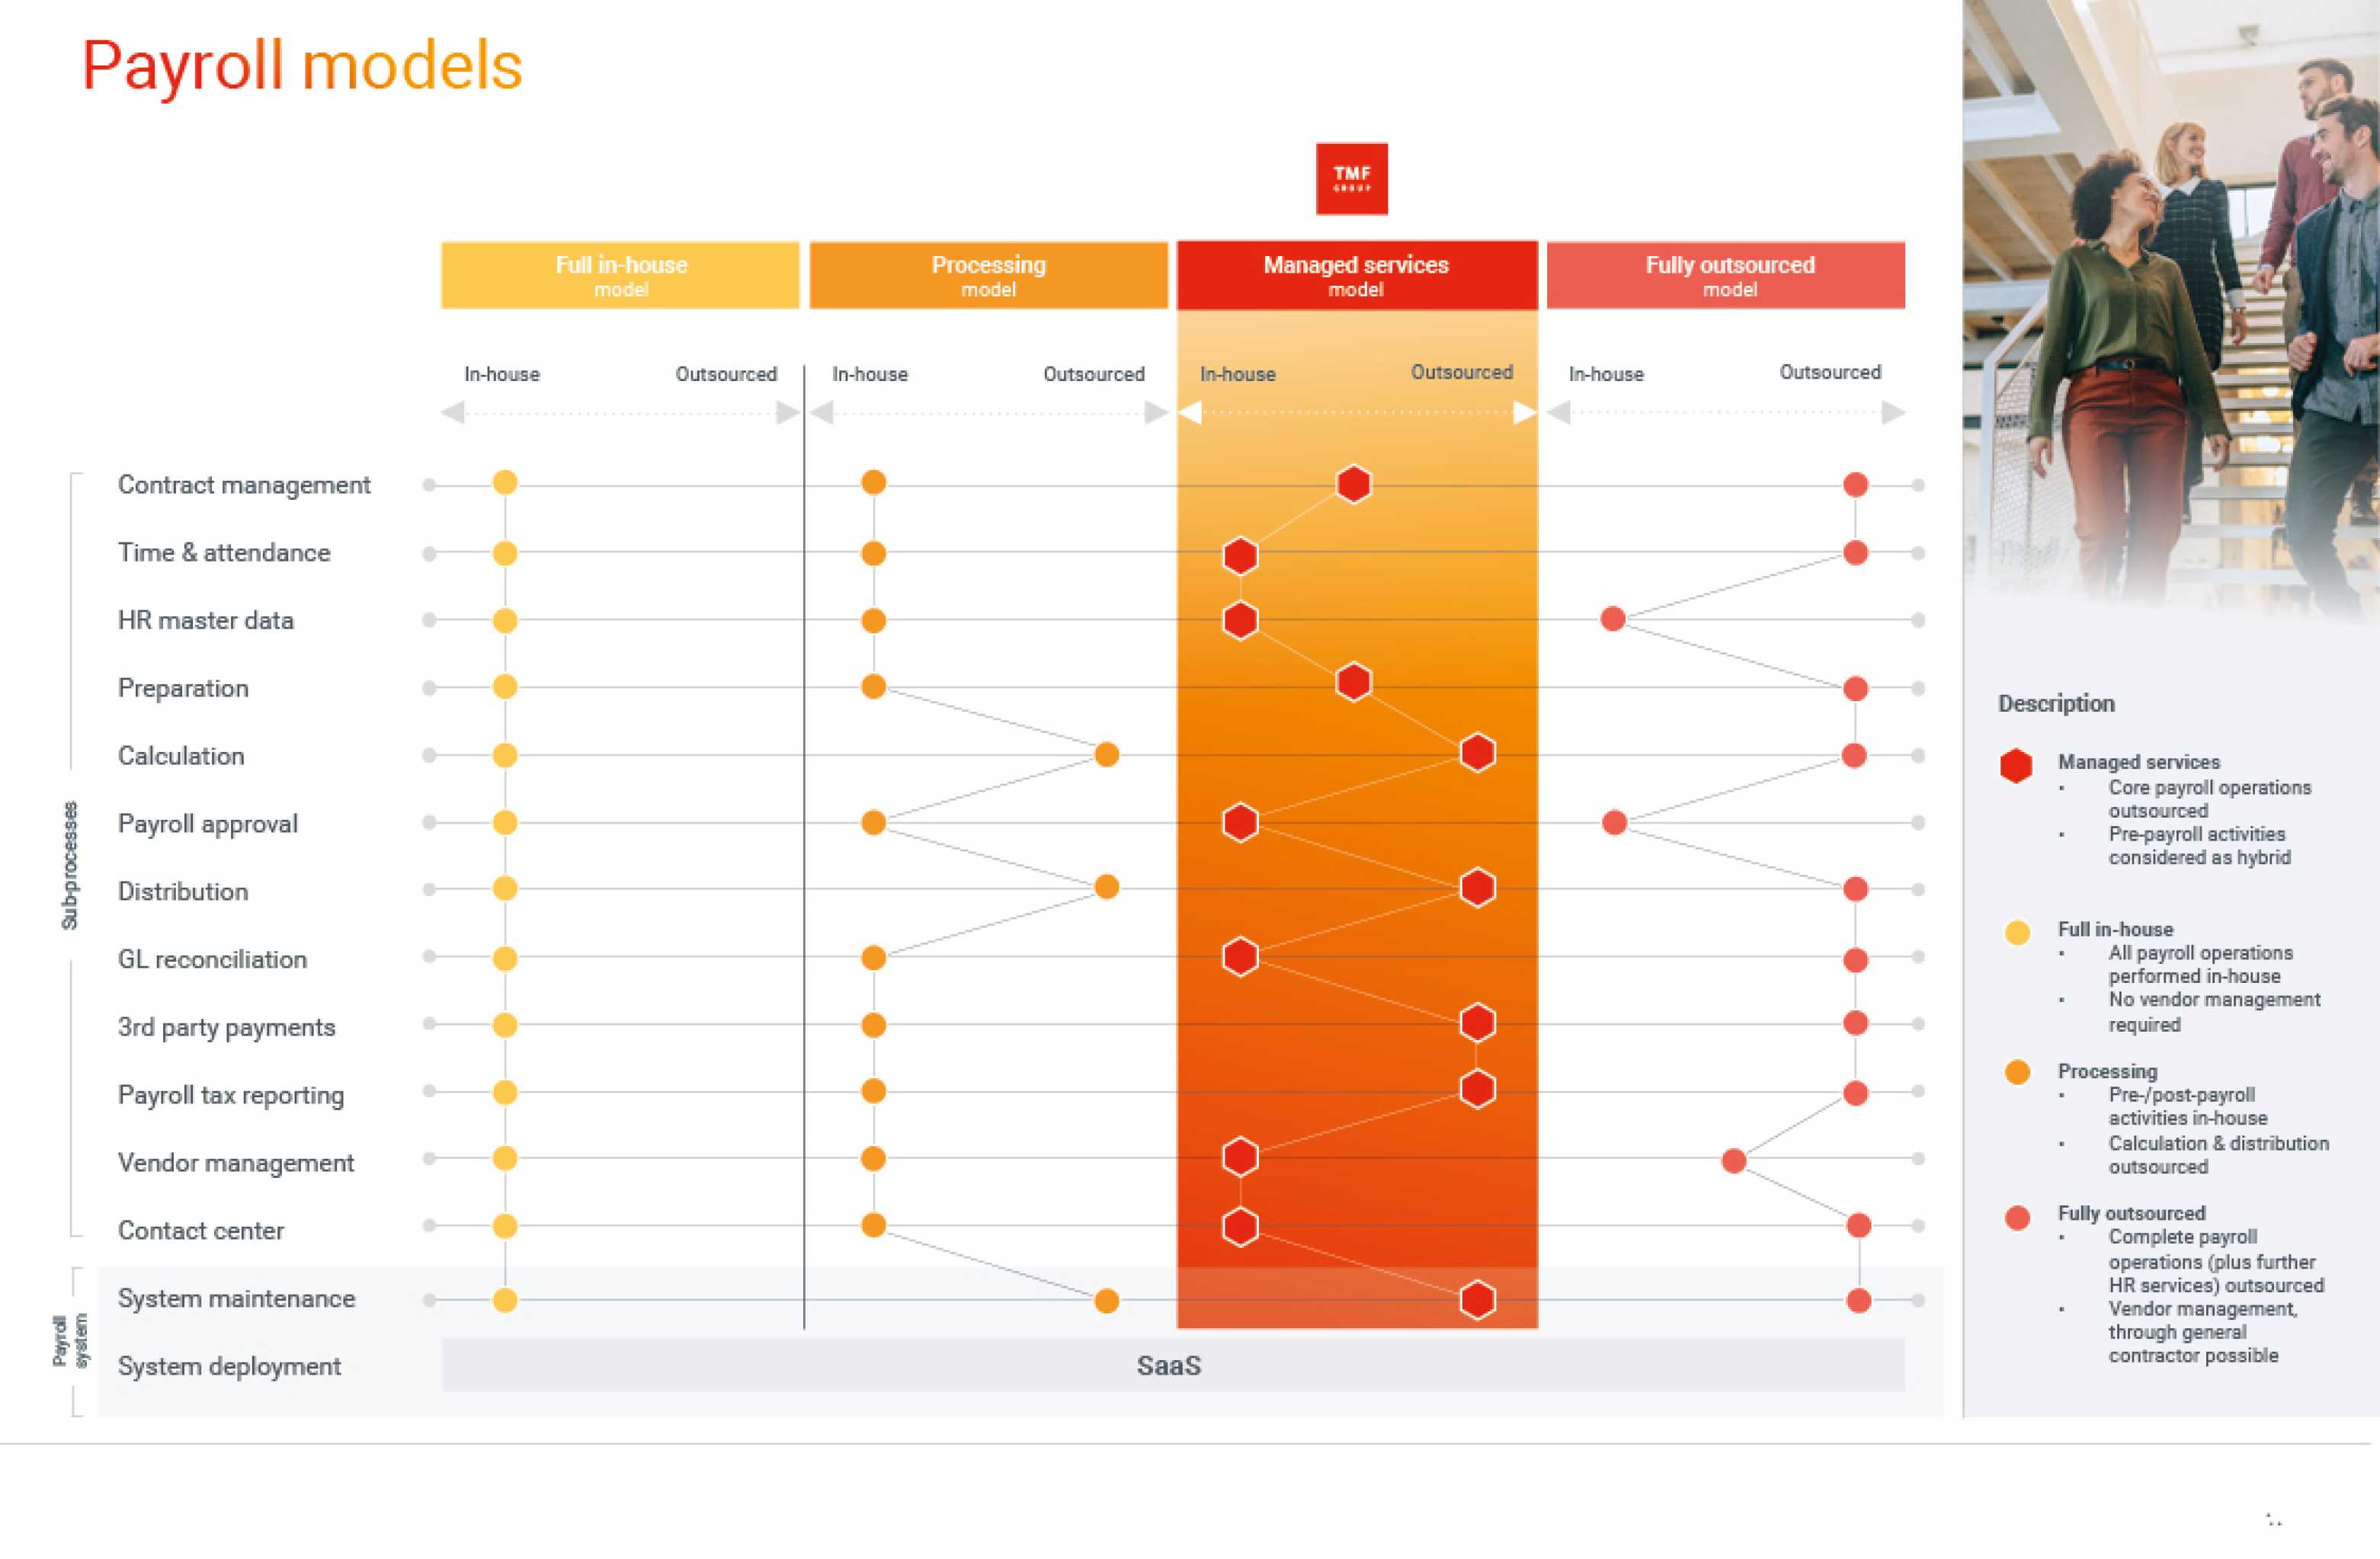 graphic showing different types of payroll models